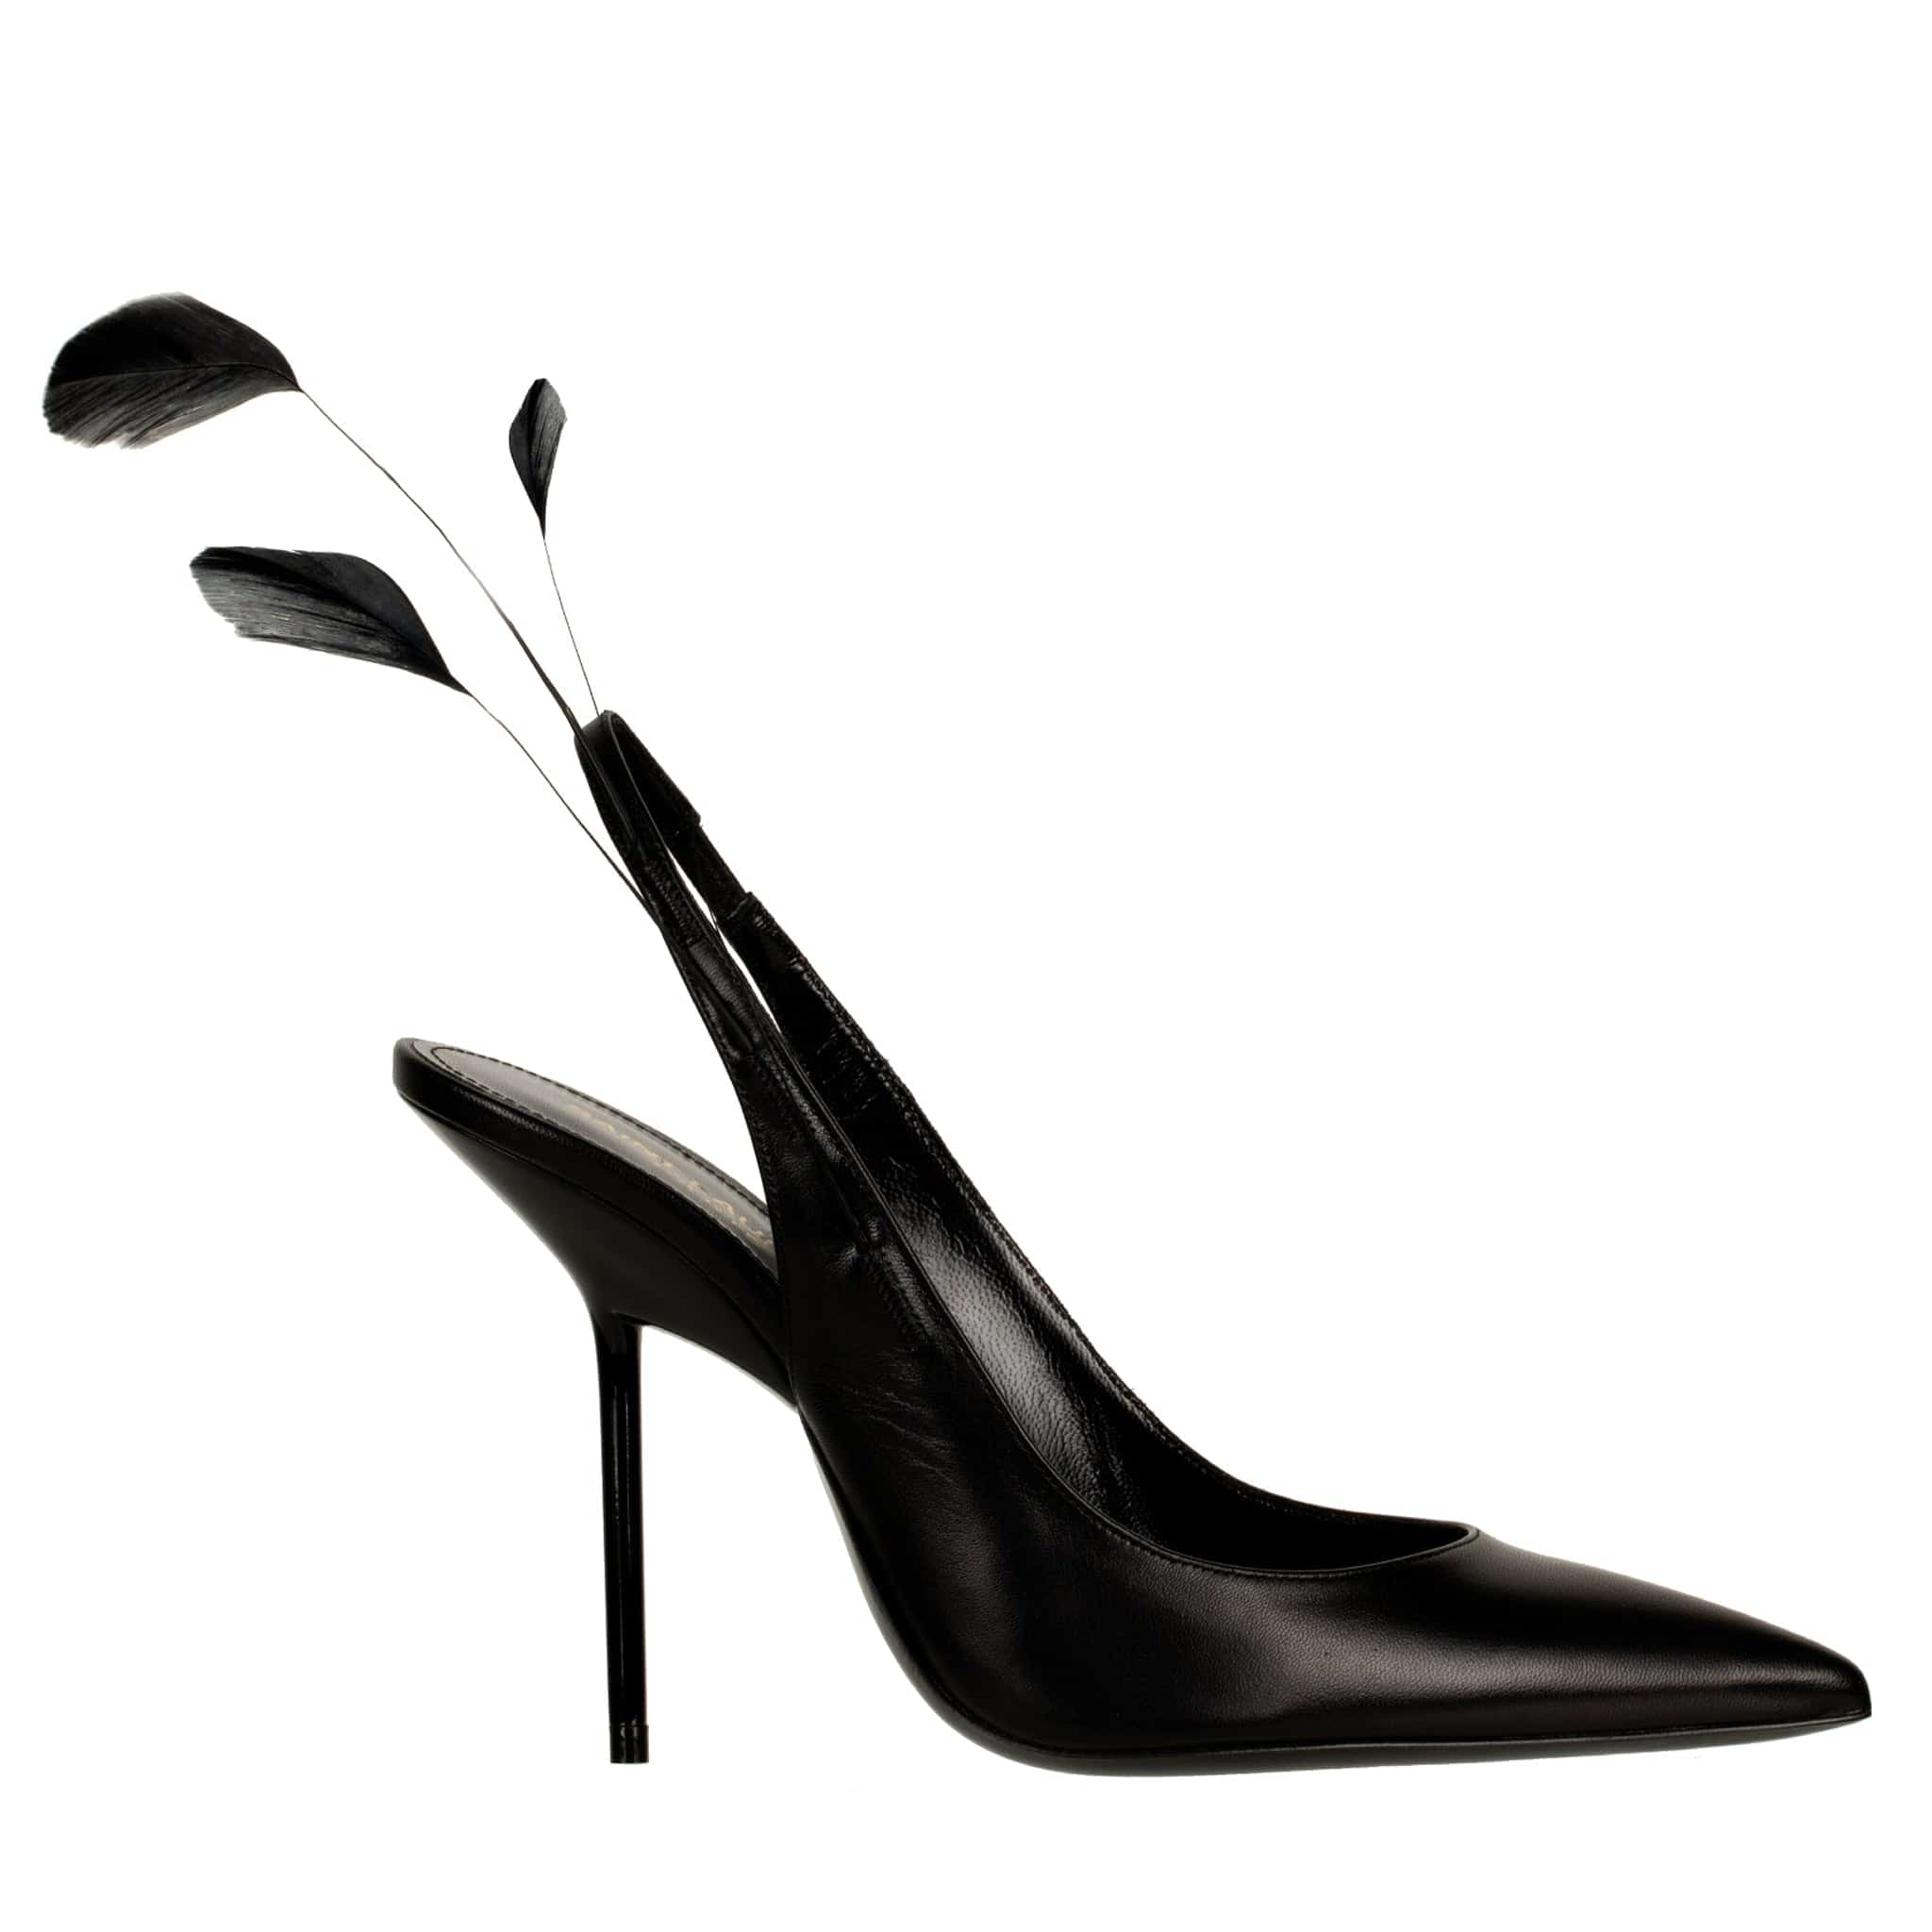 YVES SAINT LAURENT SLINGBACK PUMPS BLACK LEATHER WITH FEATHER DETAIL - On Repeat